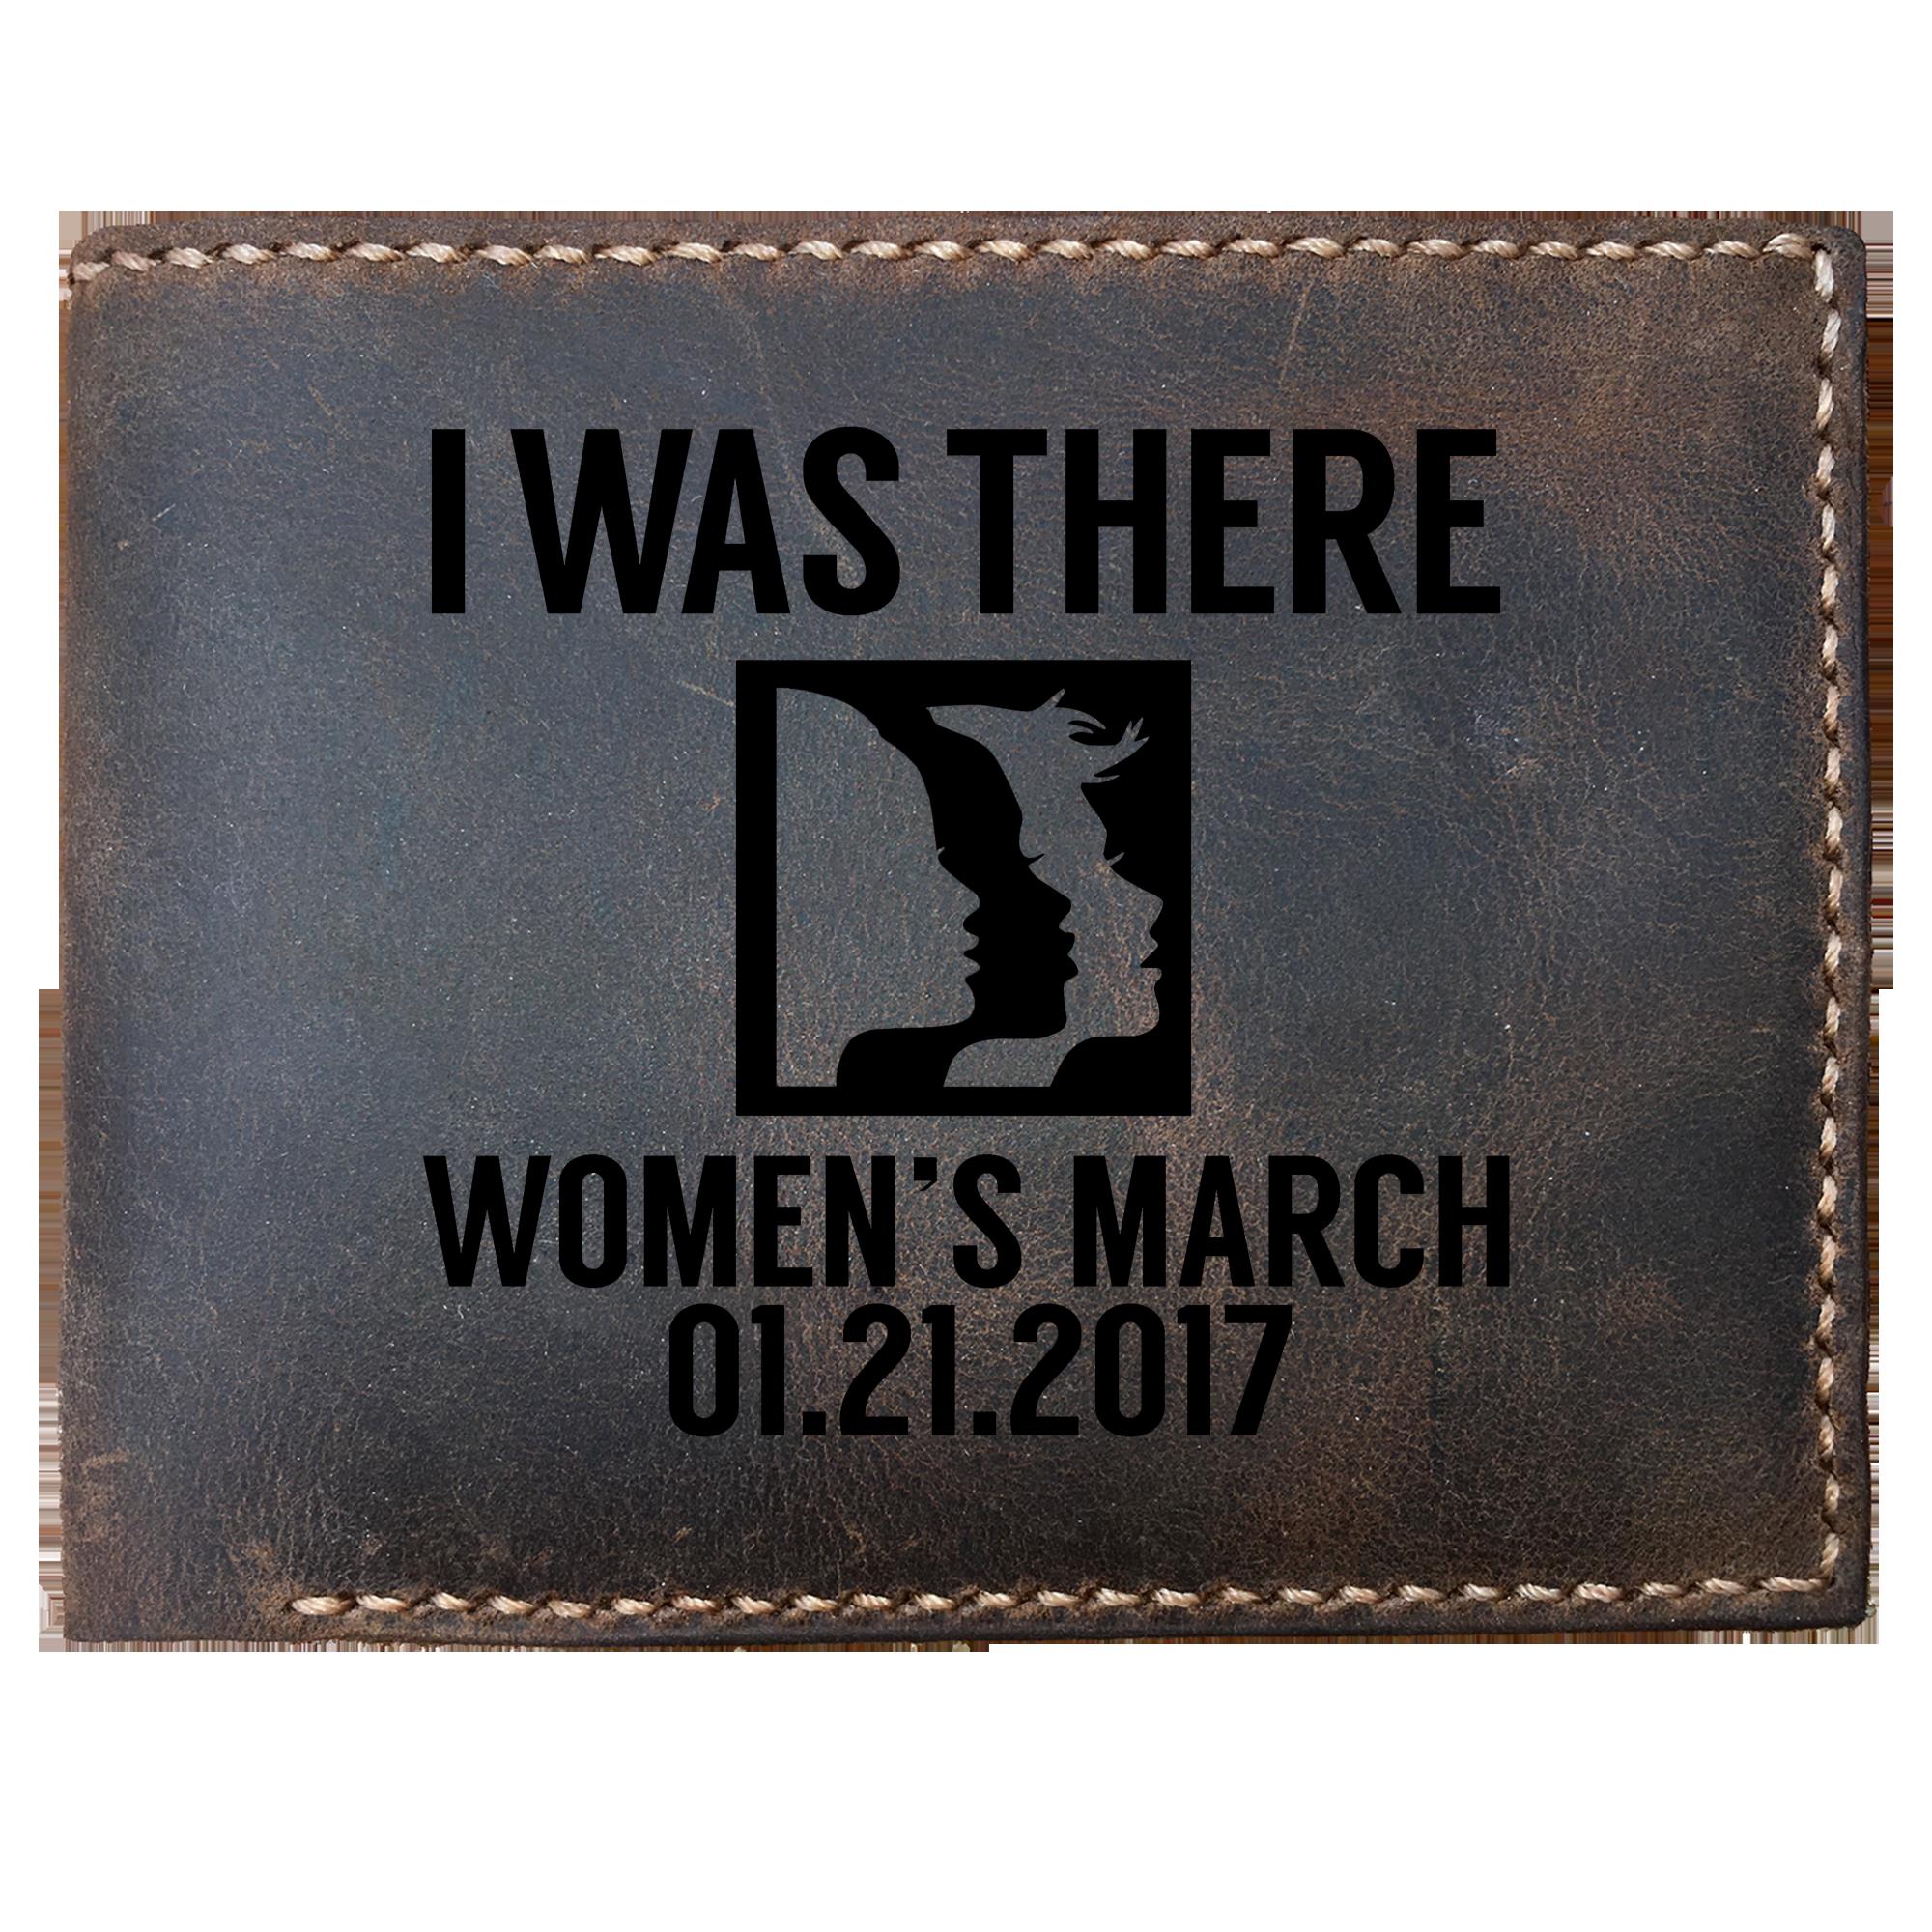 Skitongifts Funny Custom Laser Engraved Bifold Leather Wallet For Men, Women's March On Washington. I Marched